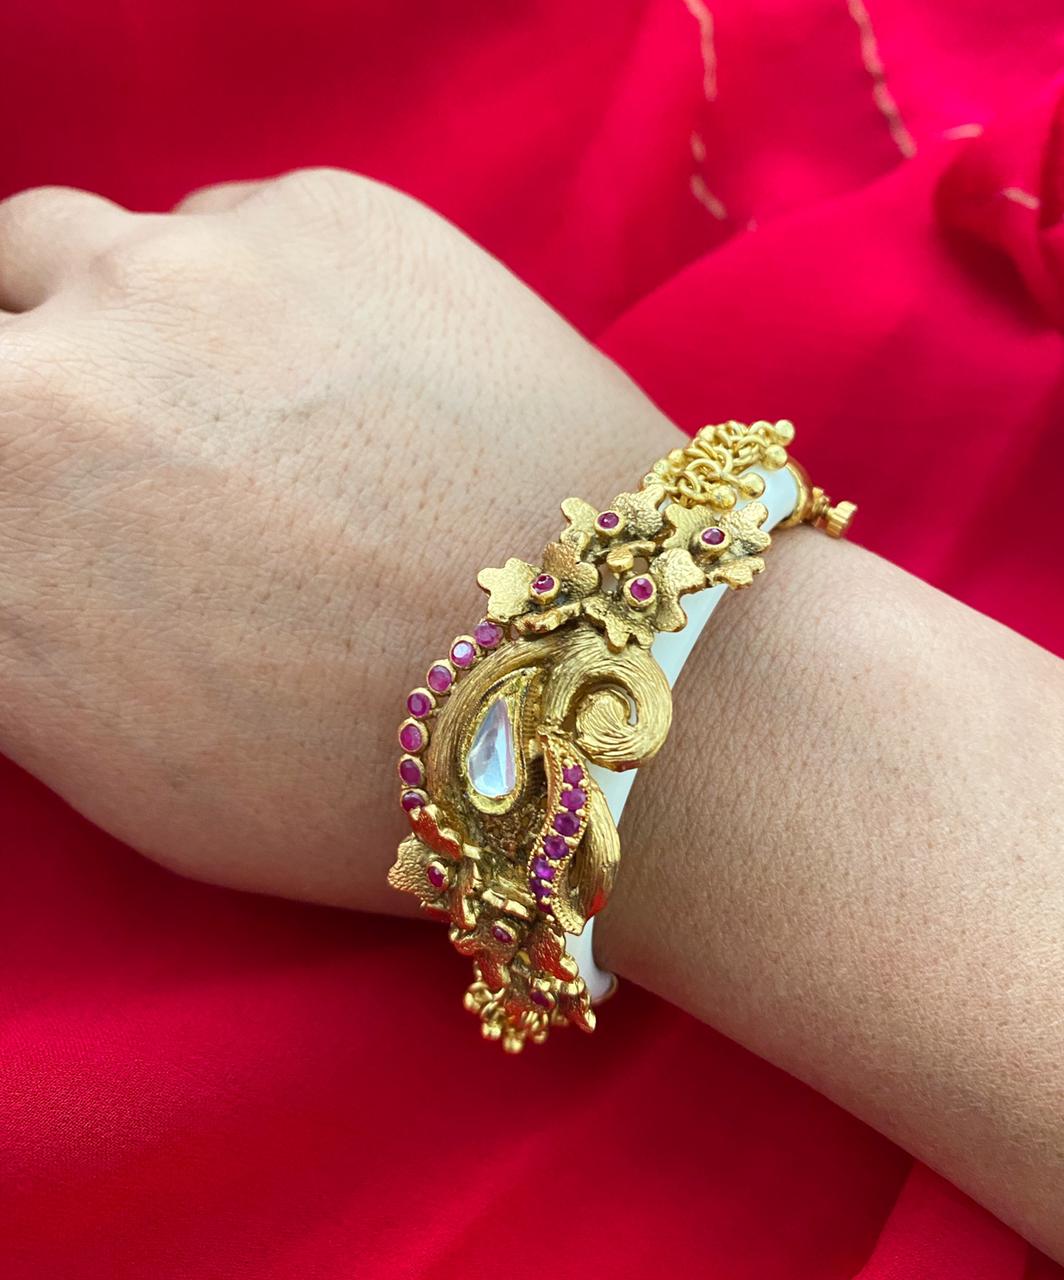 Buy Trendy Gold Bangles Designs Online For Women At Best Prices